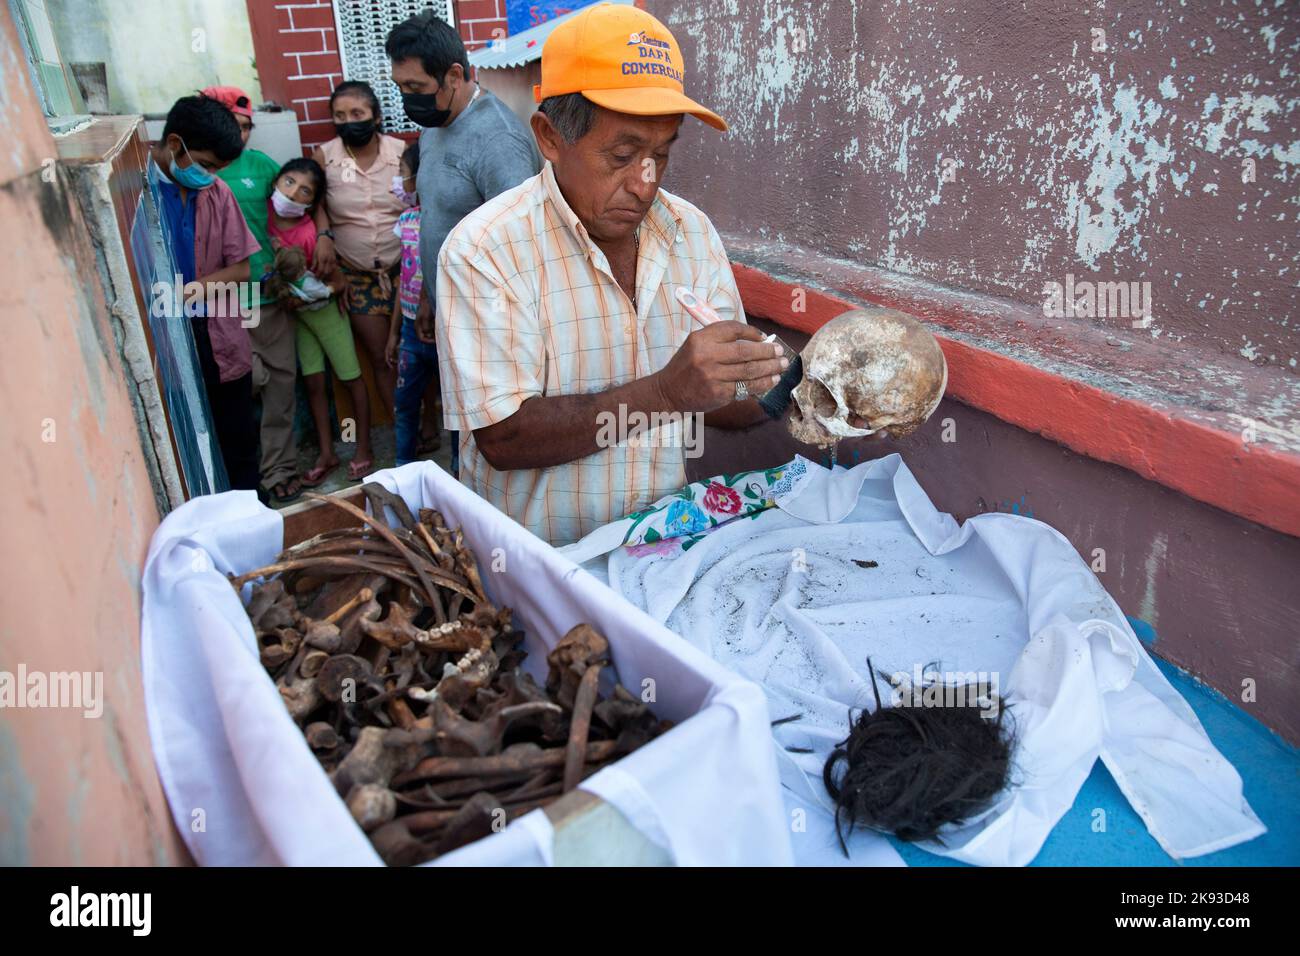 Don Venancio Tuz Chi, one of the administrators of the Pomuch cemetery, cleaning the bones and skulls of a deceased relative of the Colli Ycauch family at the cemetery of Pomuch, Campeche state, Mexico on October 22, 2022. Don Venancio has been a hired bone cleaner for over twenty years, he is paid $1.50 per skeleton. Every year in preparation for Hanal Pixán, the Mayan Day of the Dead celebration, members of the Pomuch community in southeastern Mexico extract bones from their niches and carefully clean them – an ancestral tradition seen as a gesture of love and a way to get closer to deceased Stock Photo